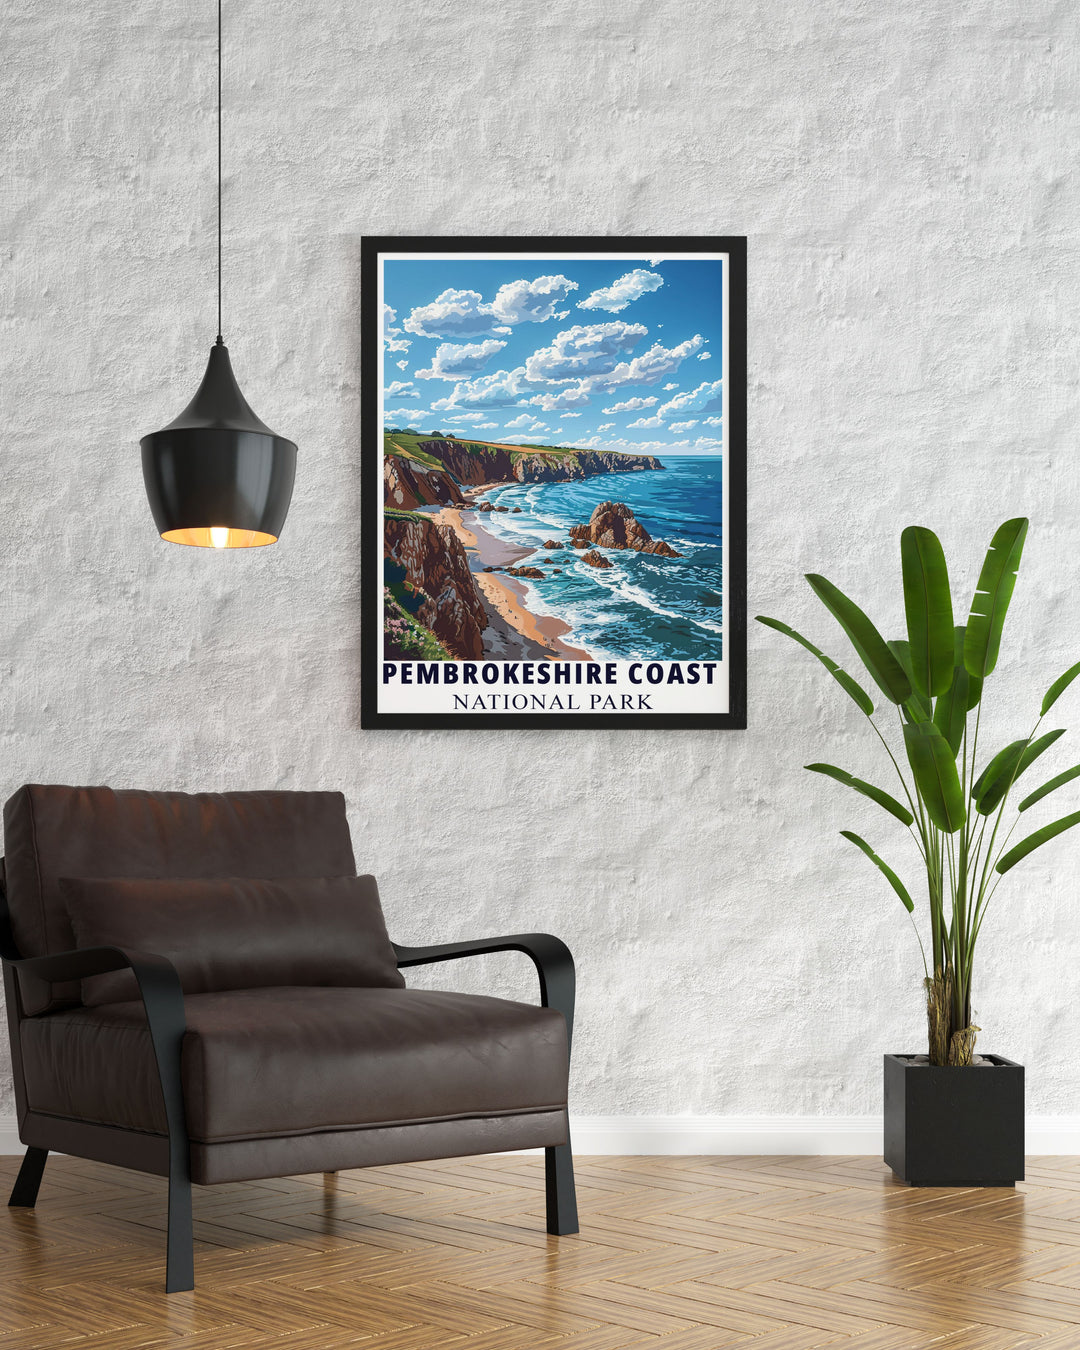 Celebrate the historical significance of the Pembrokeshire Coast with this travel poster, depicting the ancient ruins and cultural landmarks that highlight Wales rich heritage.